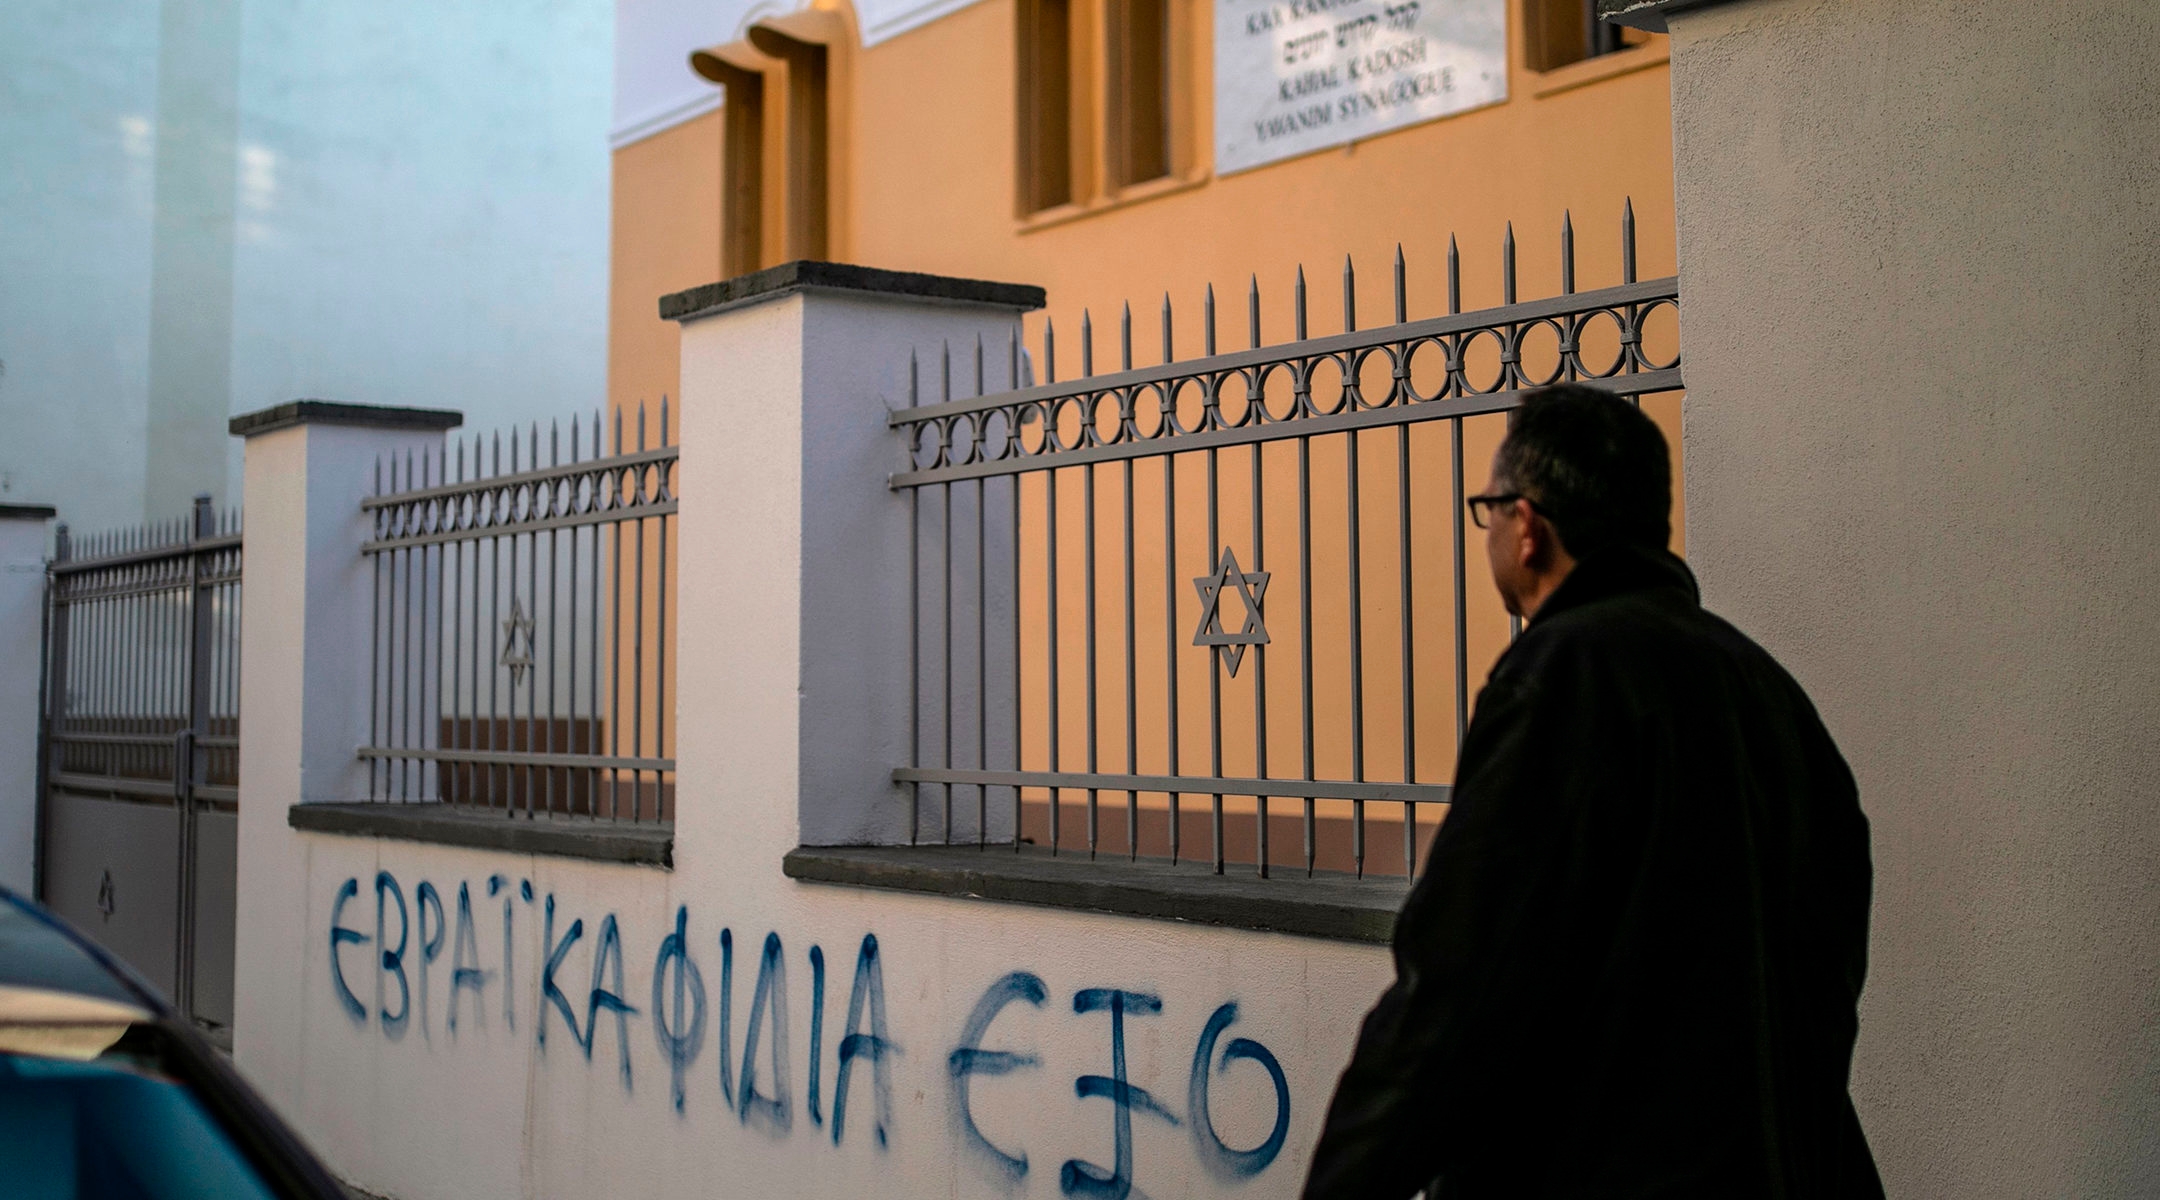 A man walking past a slogan reading "Outside the Jewish Snakes" on the fence of the synagogue of Trikala, Greece on December 31, 2019.(Lefteris Partsalis/AFP via Getty Images)